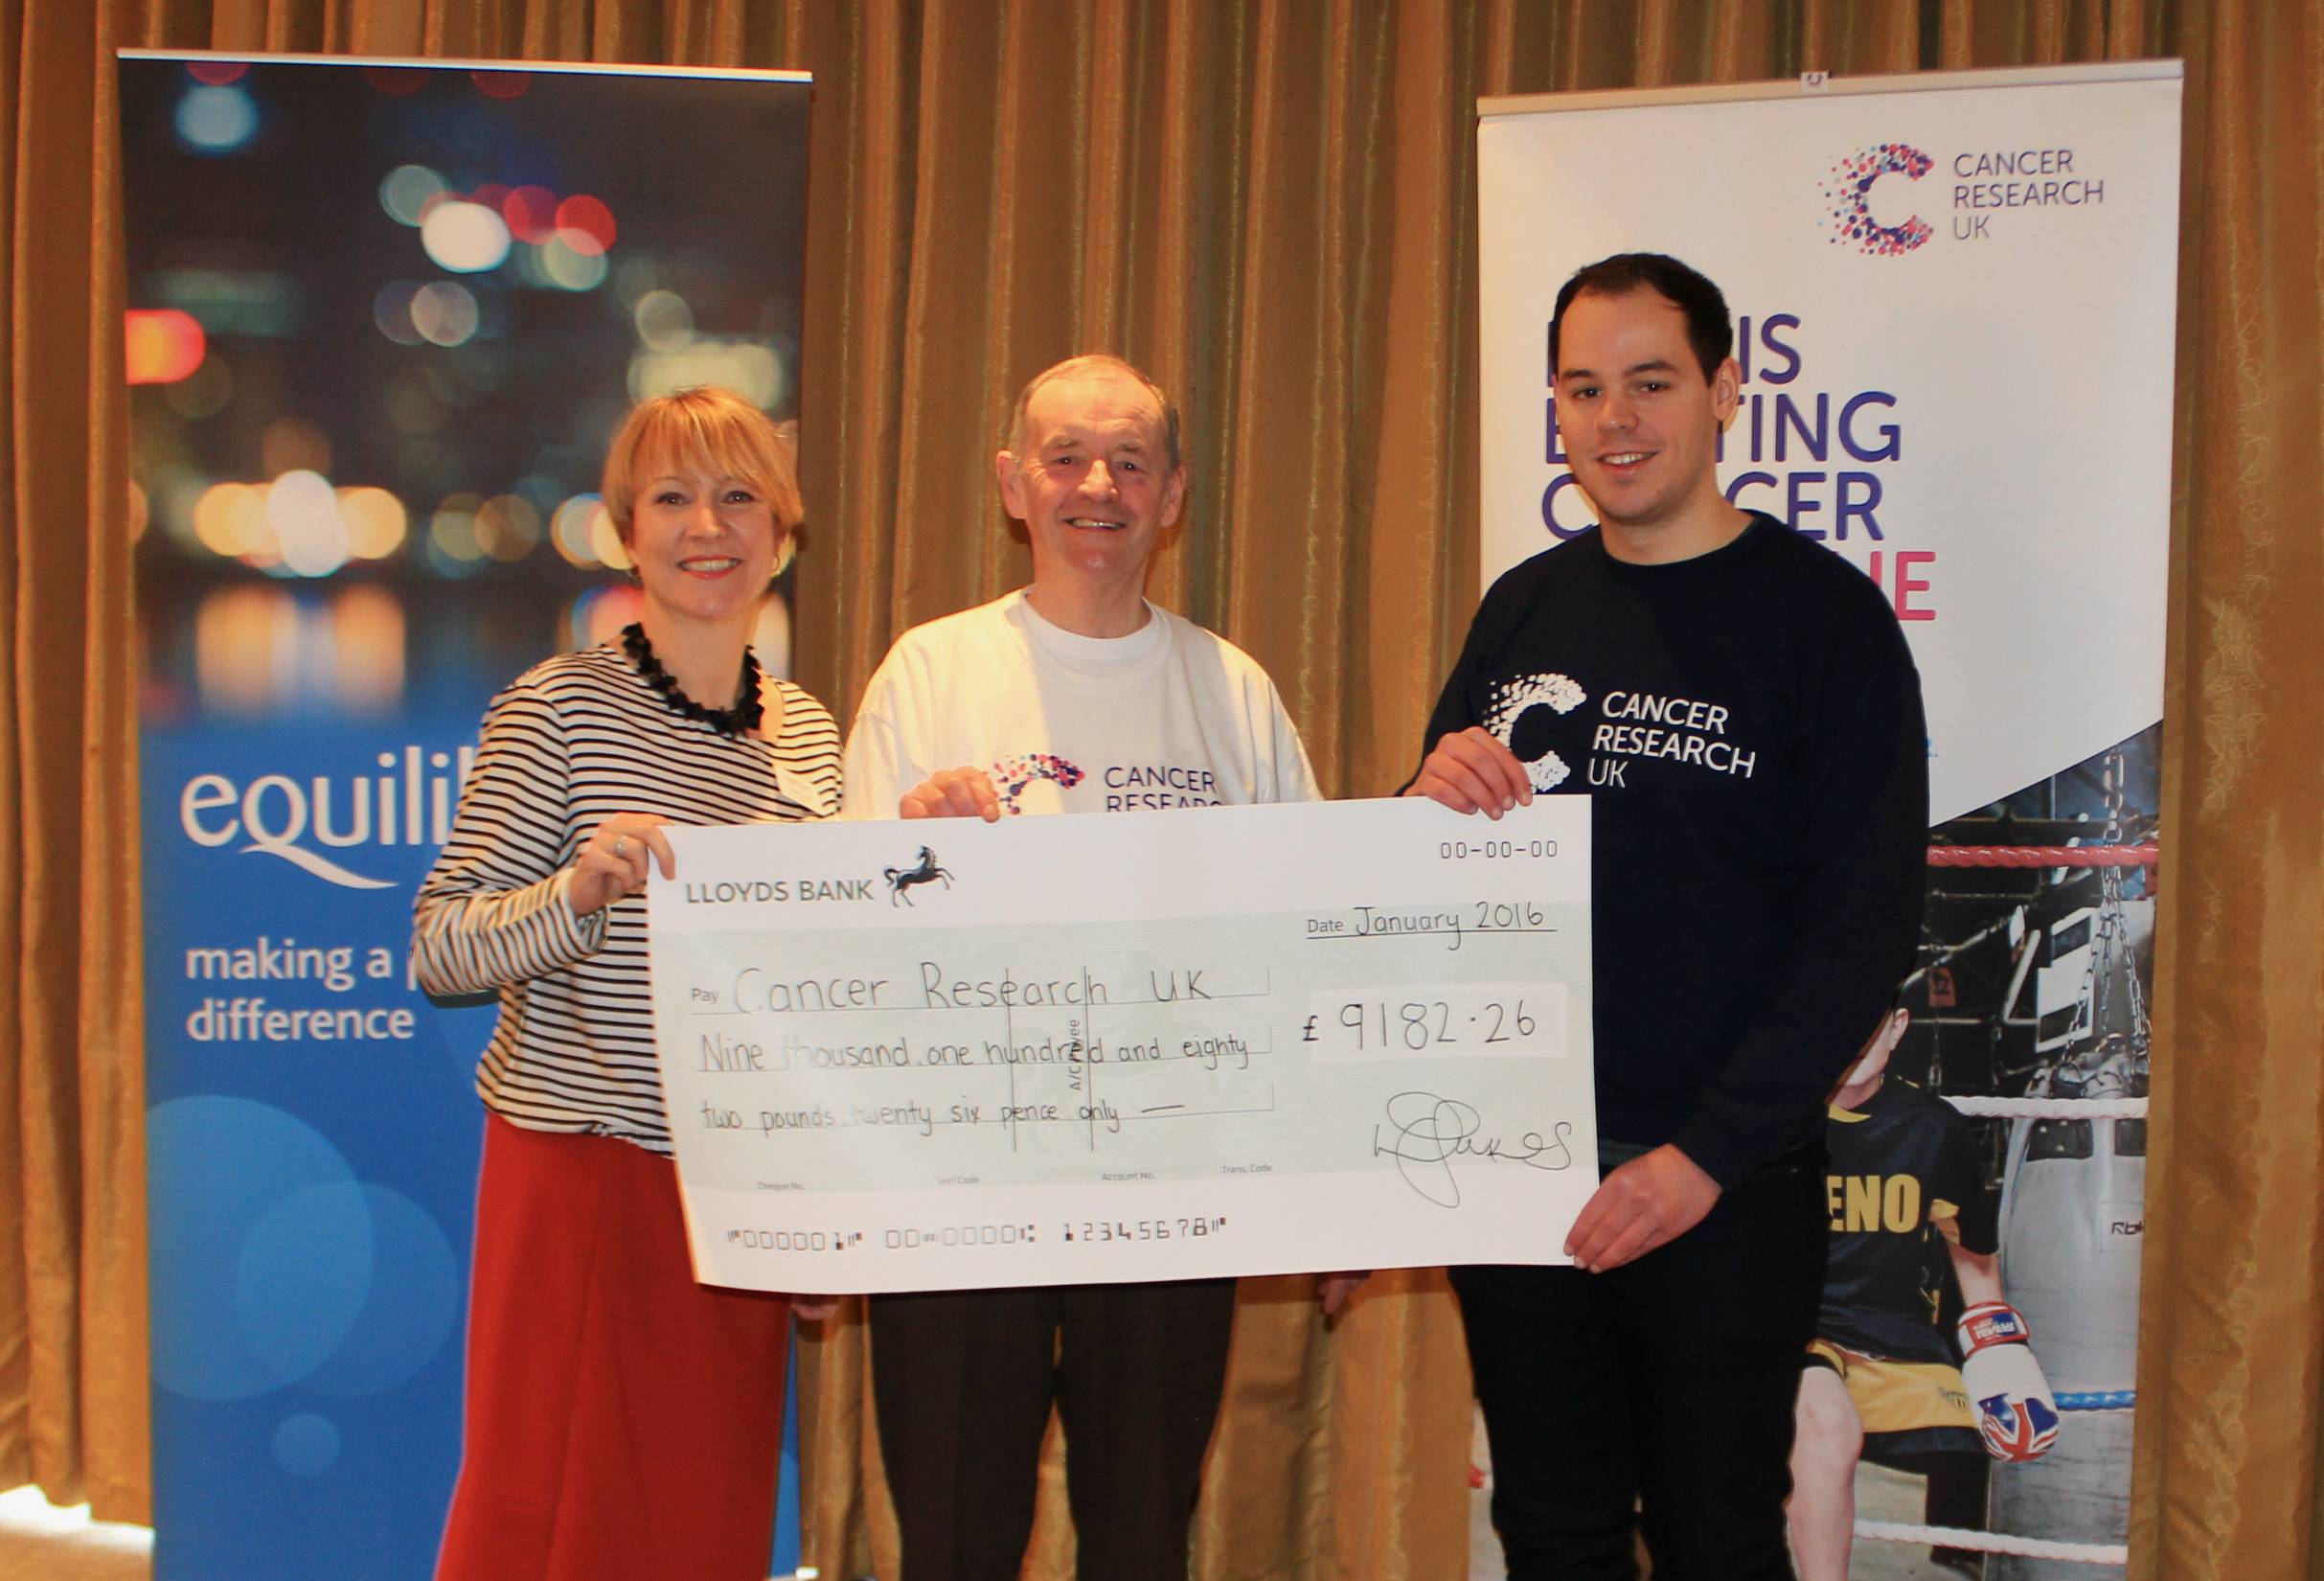 Cancer Research representatives receiving a large cheque from equilibrium for over £9,000